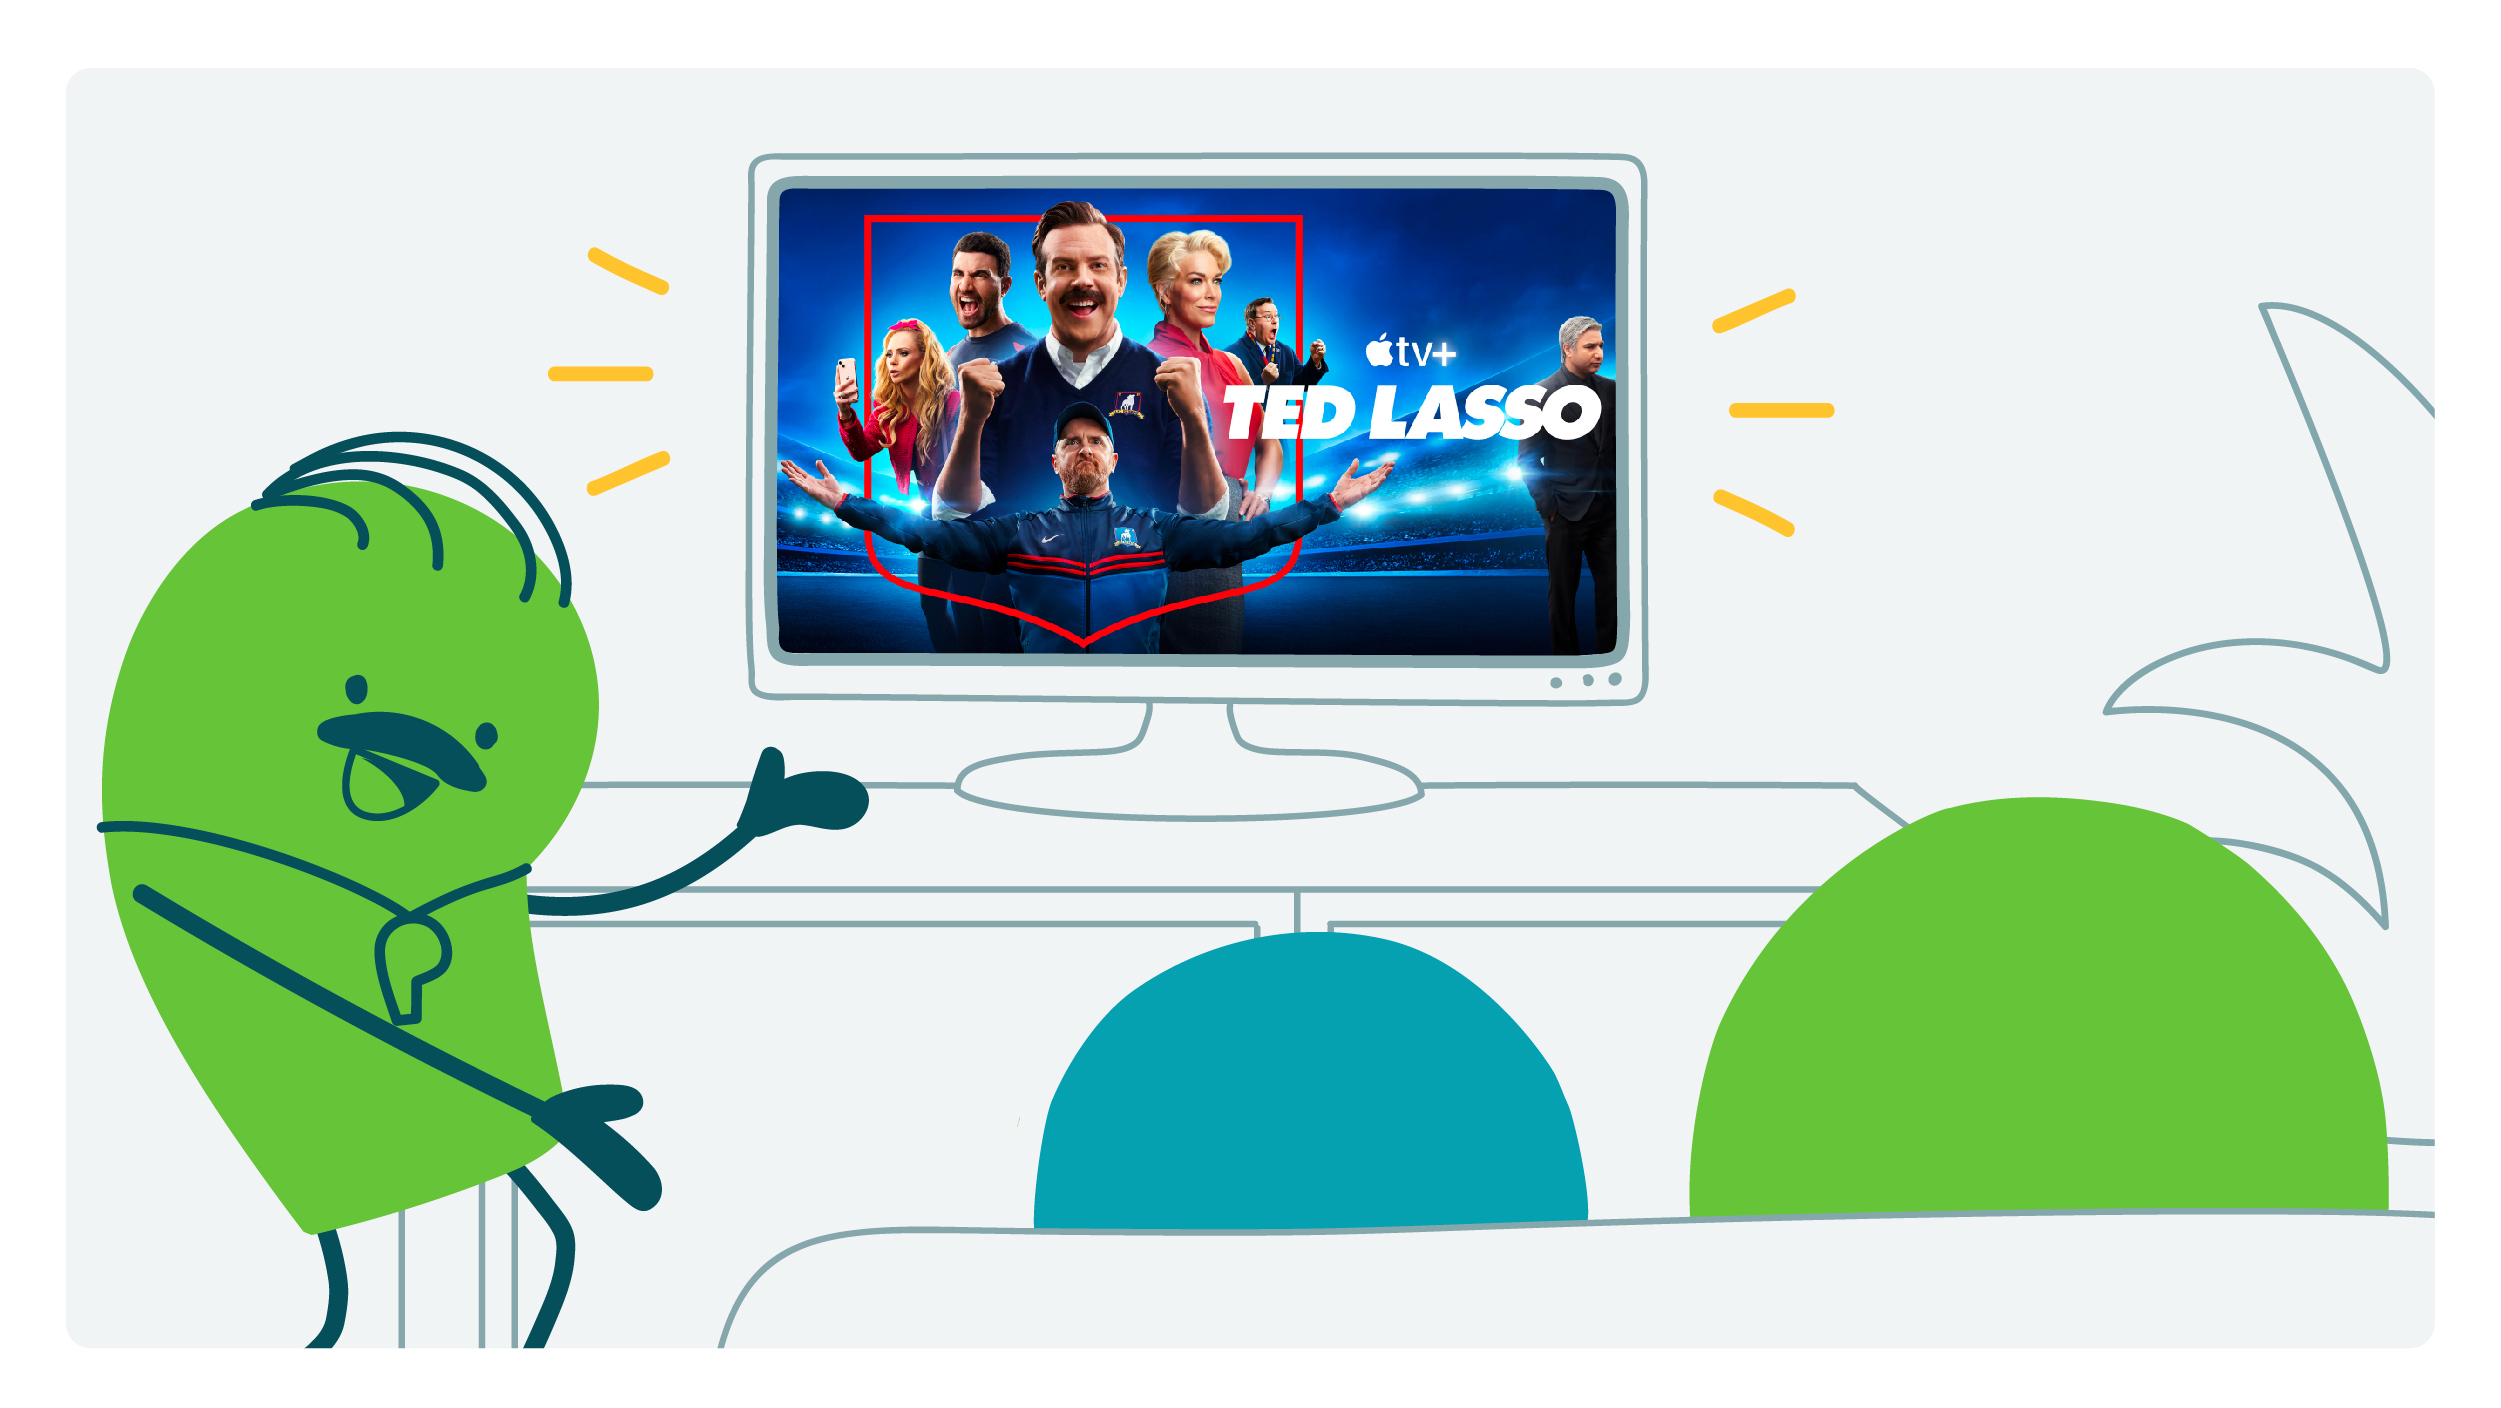 A Ted Lasso doodle with his signature mustache and whistle presents a screen with the Ted Lasso title screen.